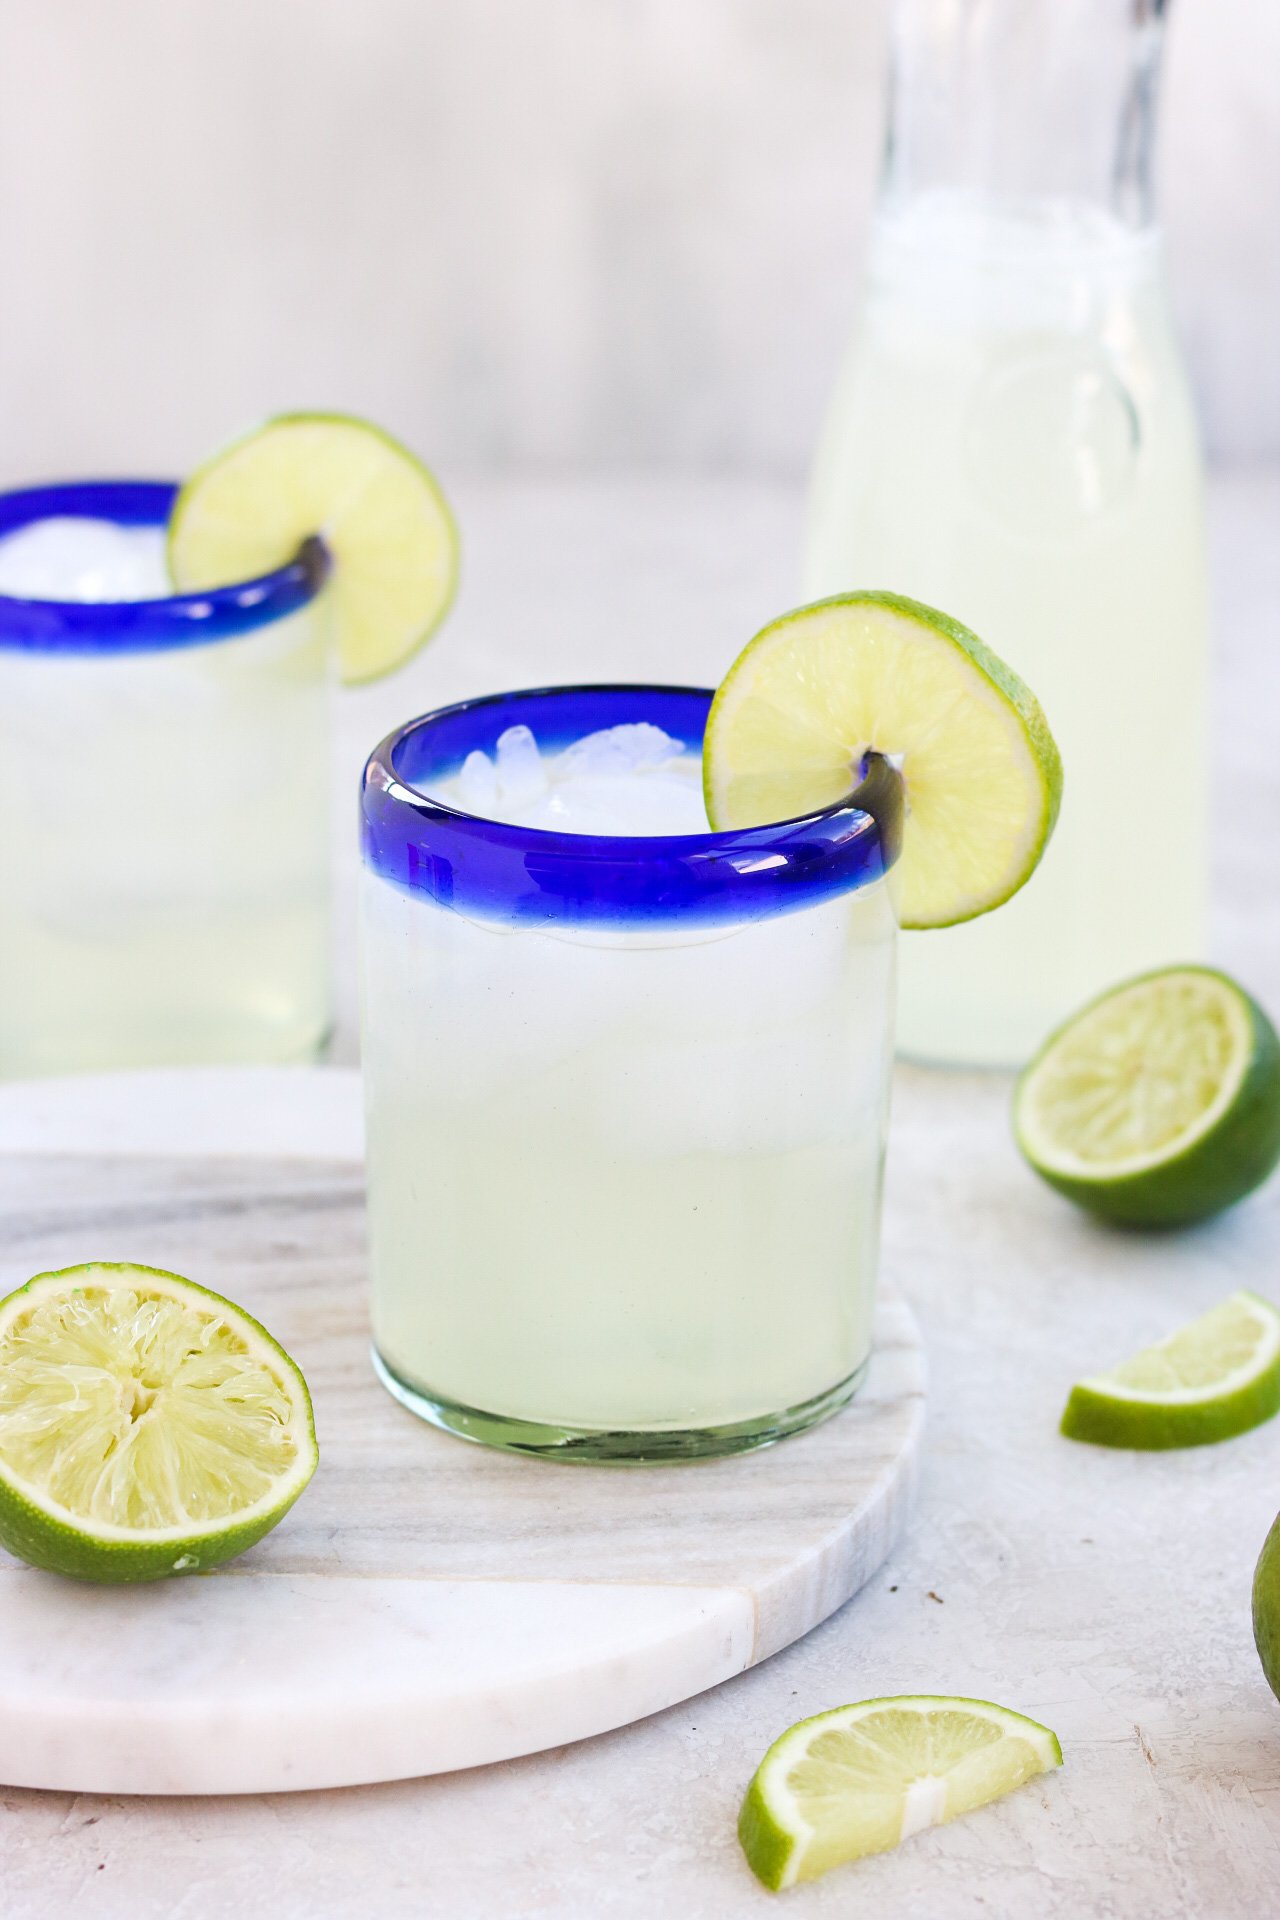 a closeup view of one glass filled with ice and limeade with a lime wedge on the rim with a squeezed lime next to the glass. Another glass of the same is in the background.